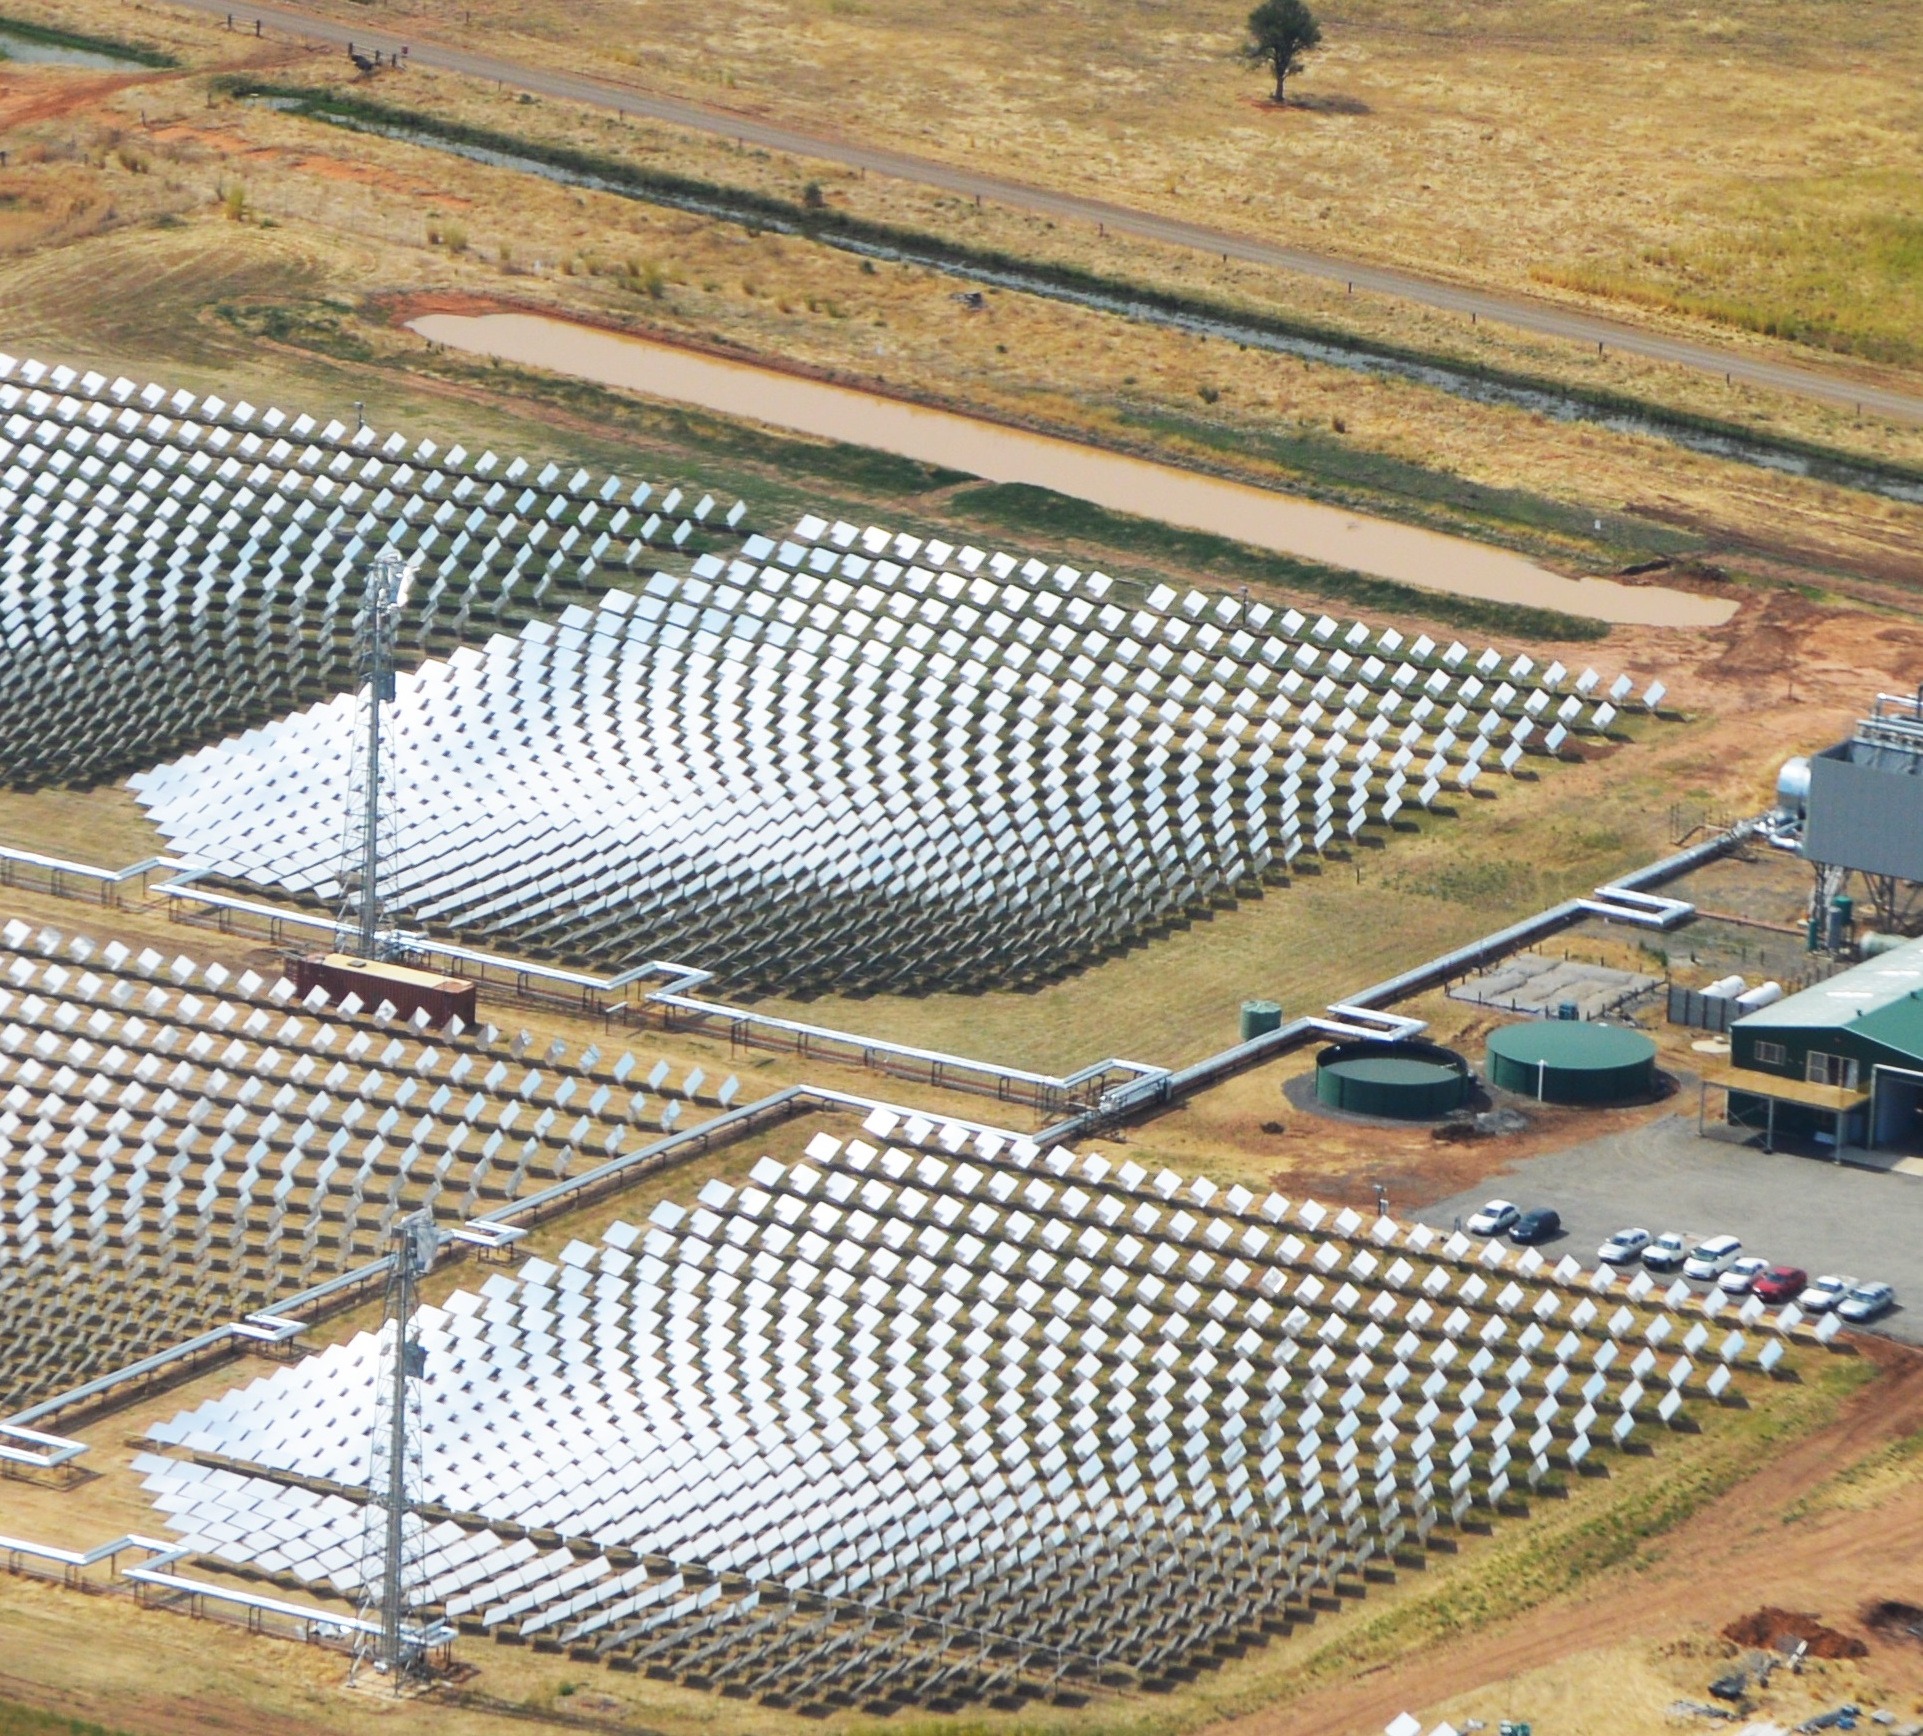 Sodium-based Vast Solar Combines the Best of Trough & Tower CSP to Win our Innovation Award